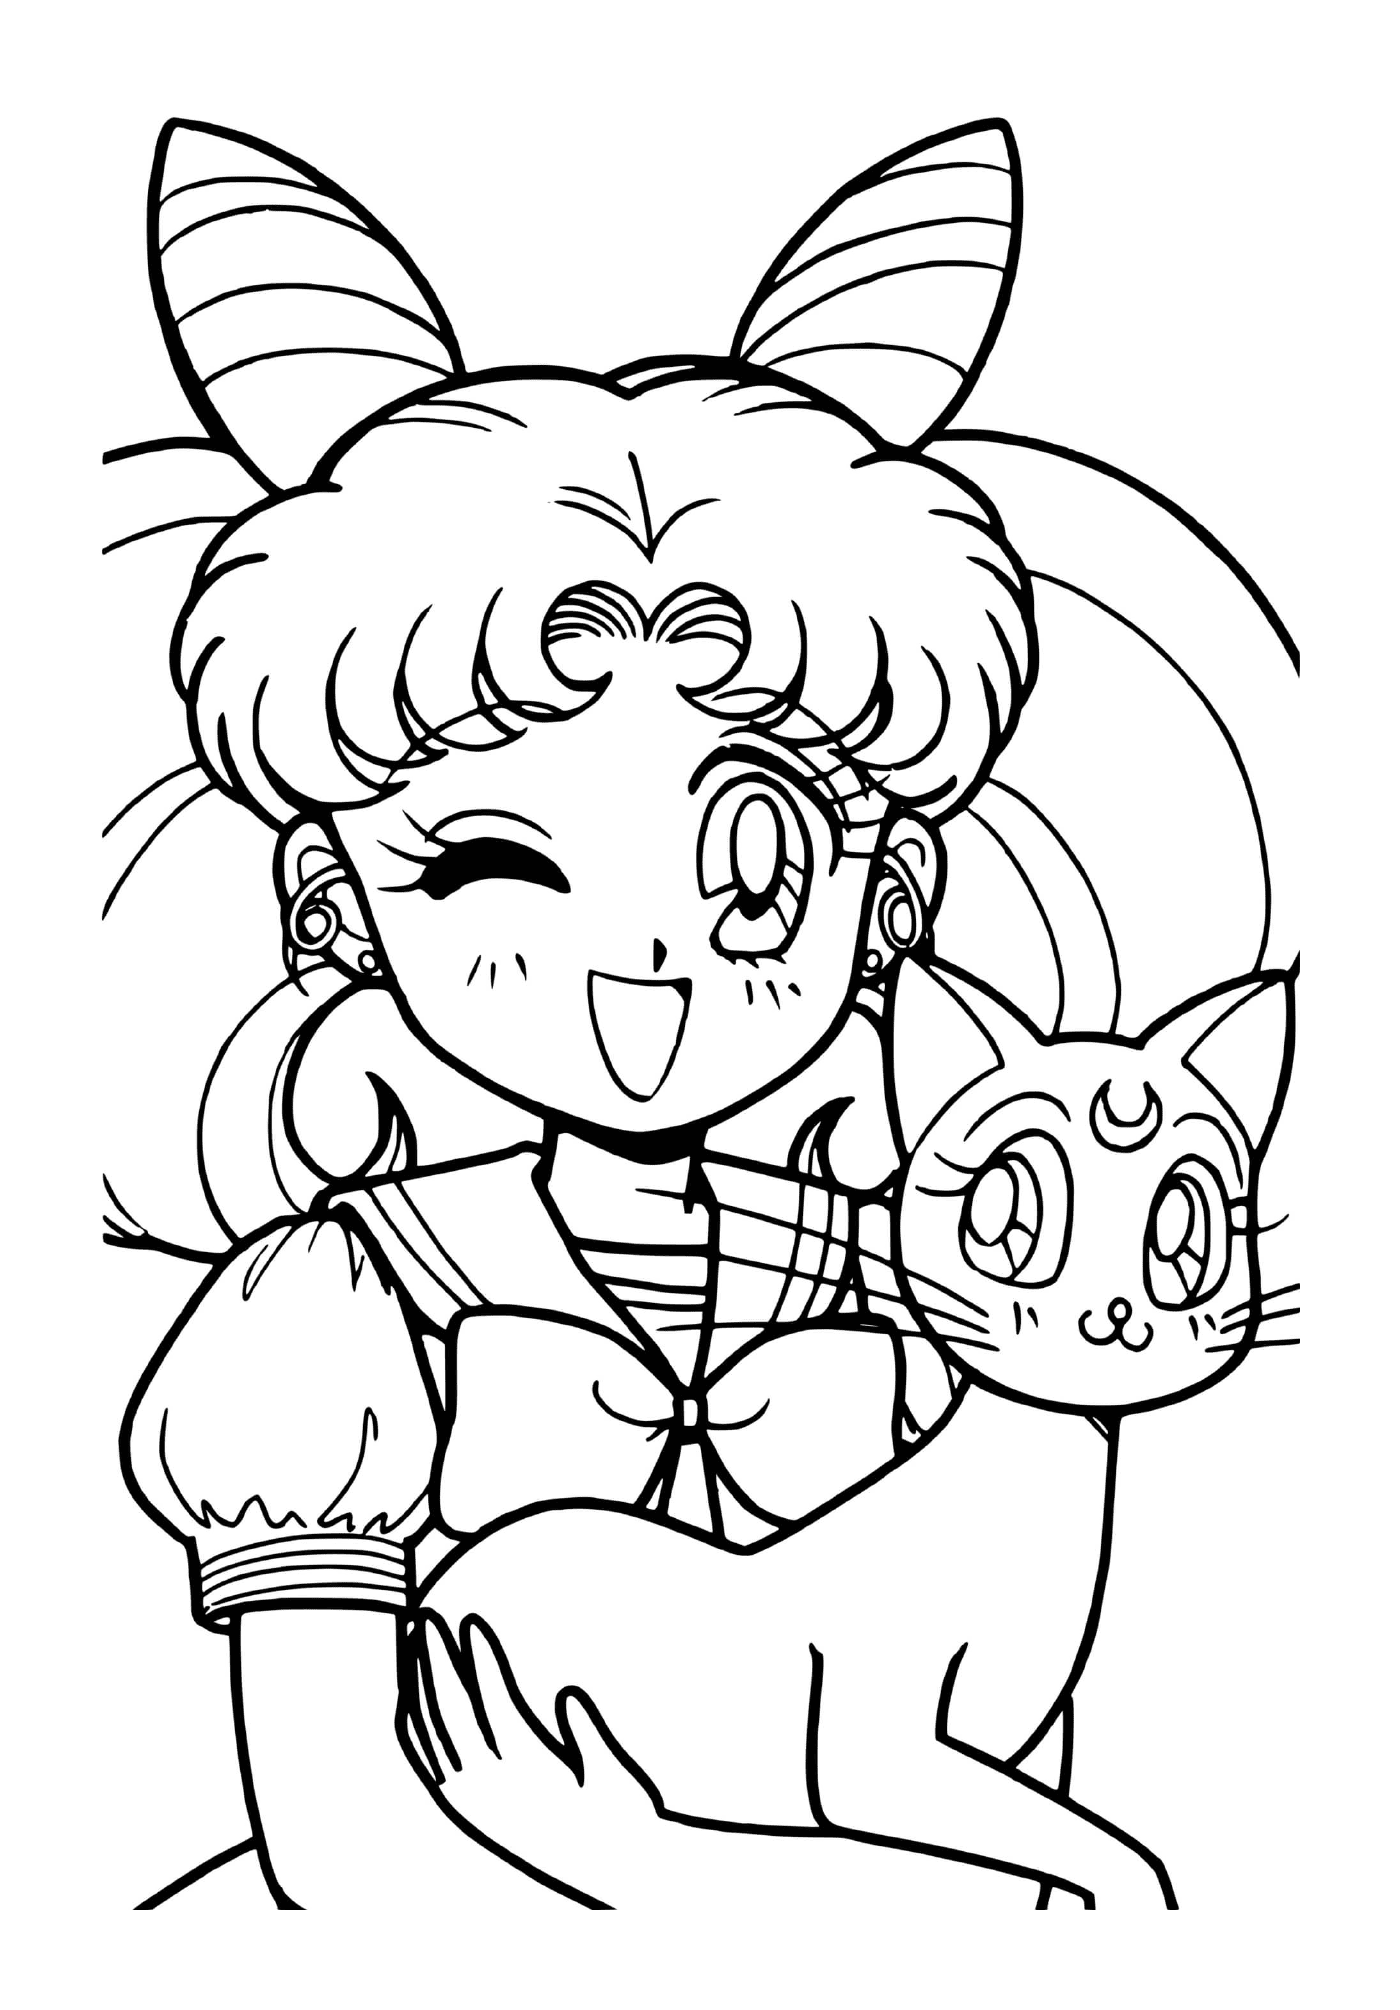  Sailor Moon and his cat 